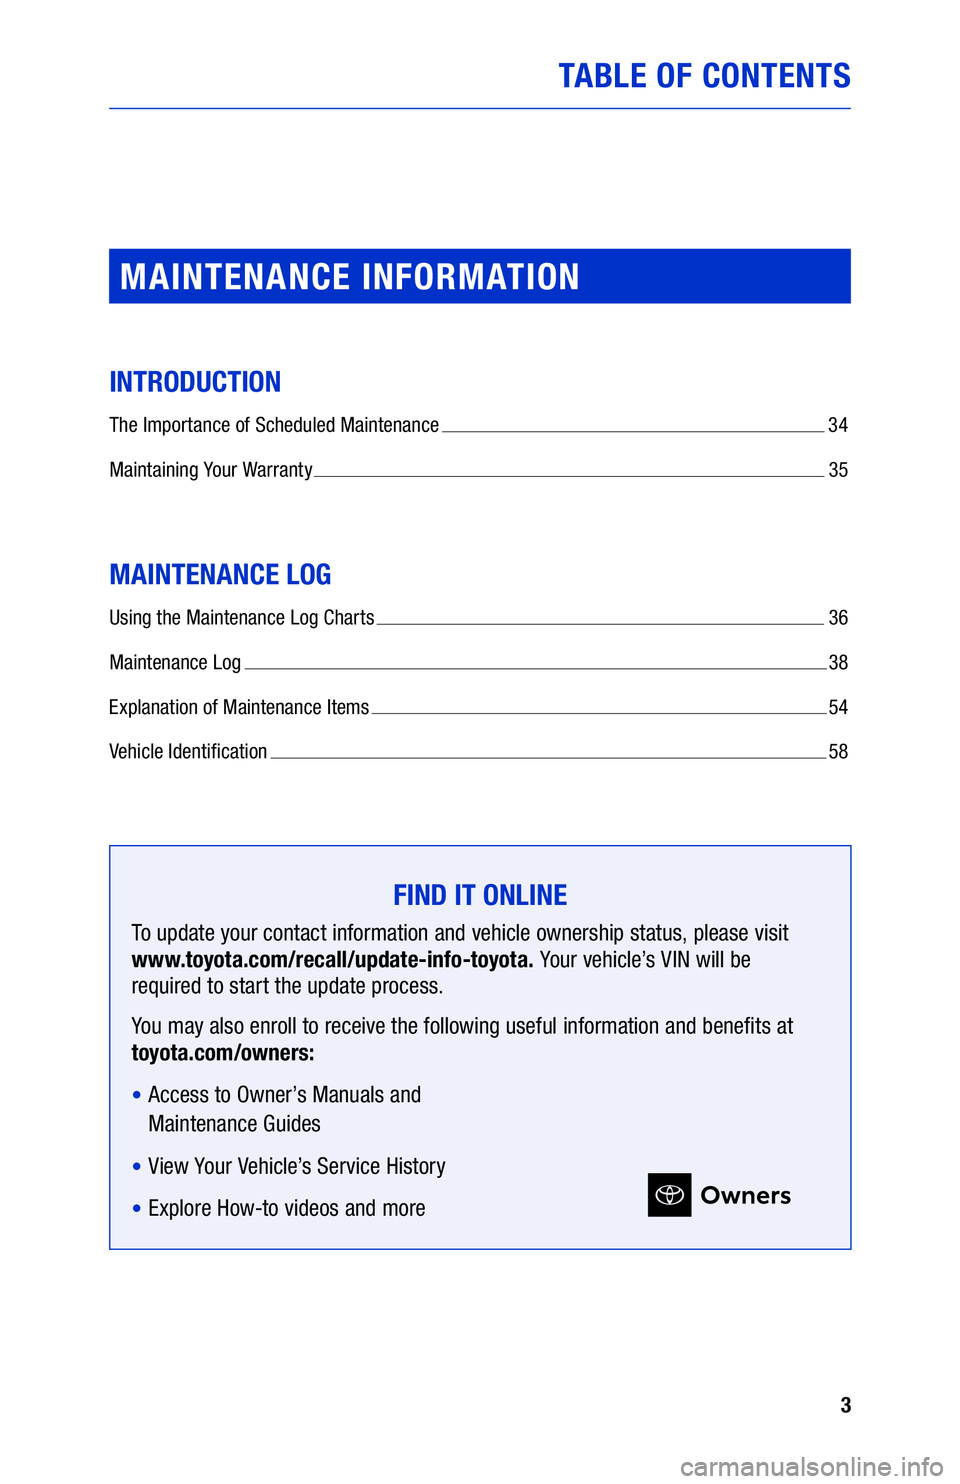 TOYOTA HIGHLANDER 2021  Warranties & Maintenance Guides (in English) 3
TABLE OF CONTENTS
MAINTENANCE INFORMATION
INTRODUCTION
The Importance of Scheduled Maintenance  34
M
aintaining Your Warranty 
 35
MAINTENANCE LOG
Using the Maintenance Log Charts  36
M
aintenance L